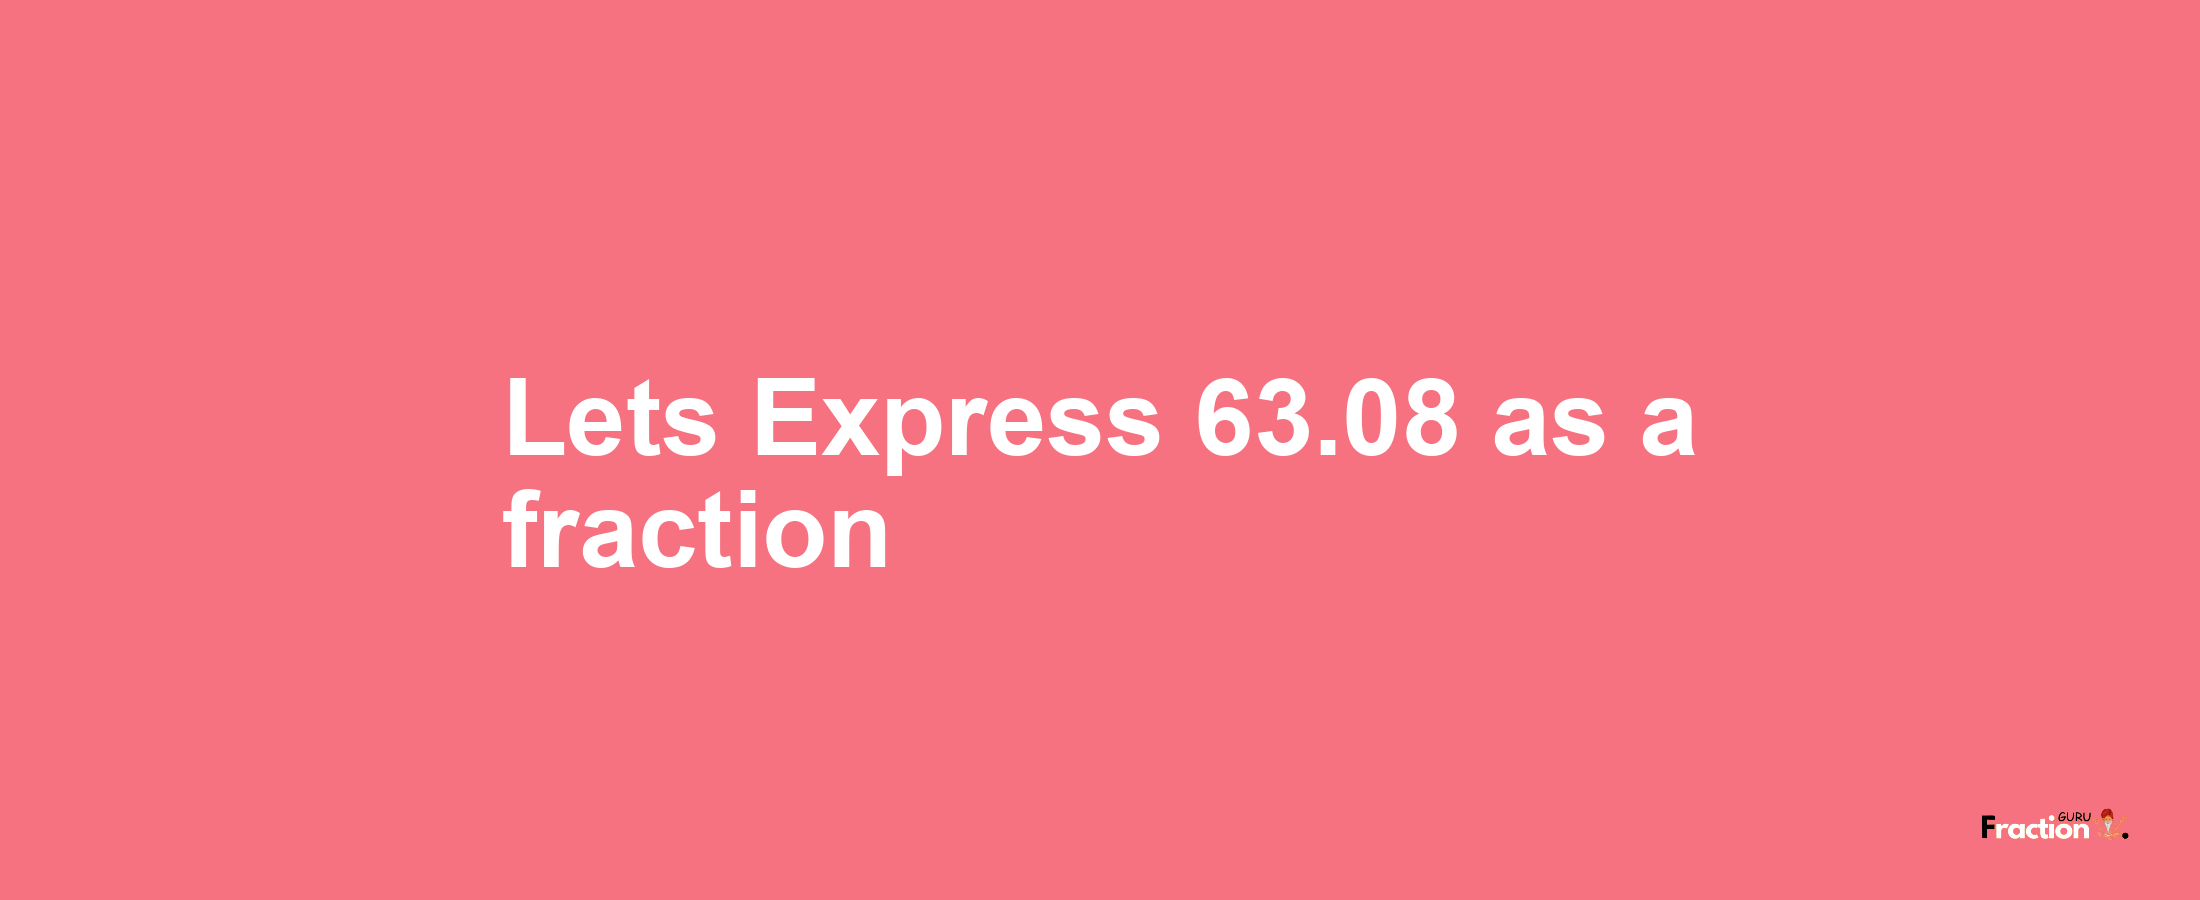 Lets Express 63.08 as afraction